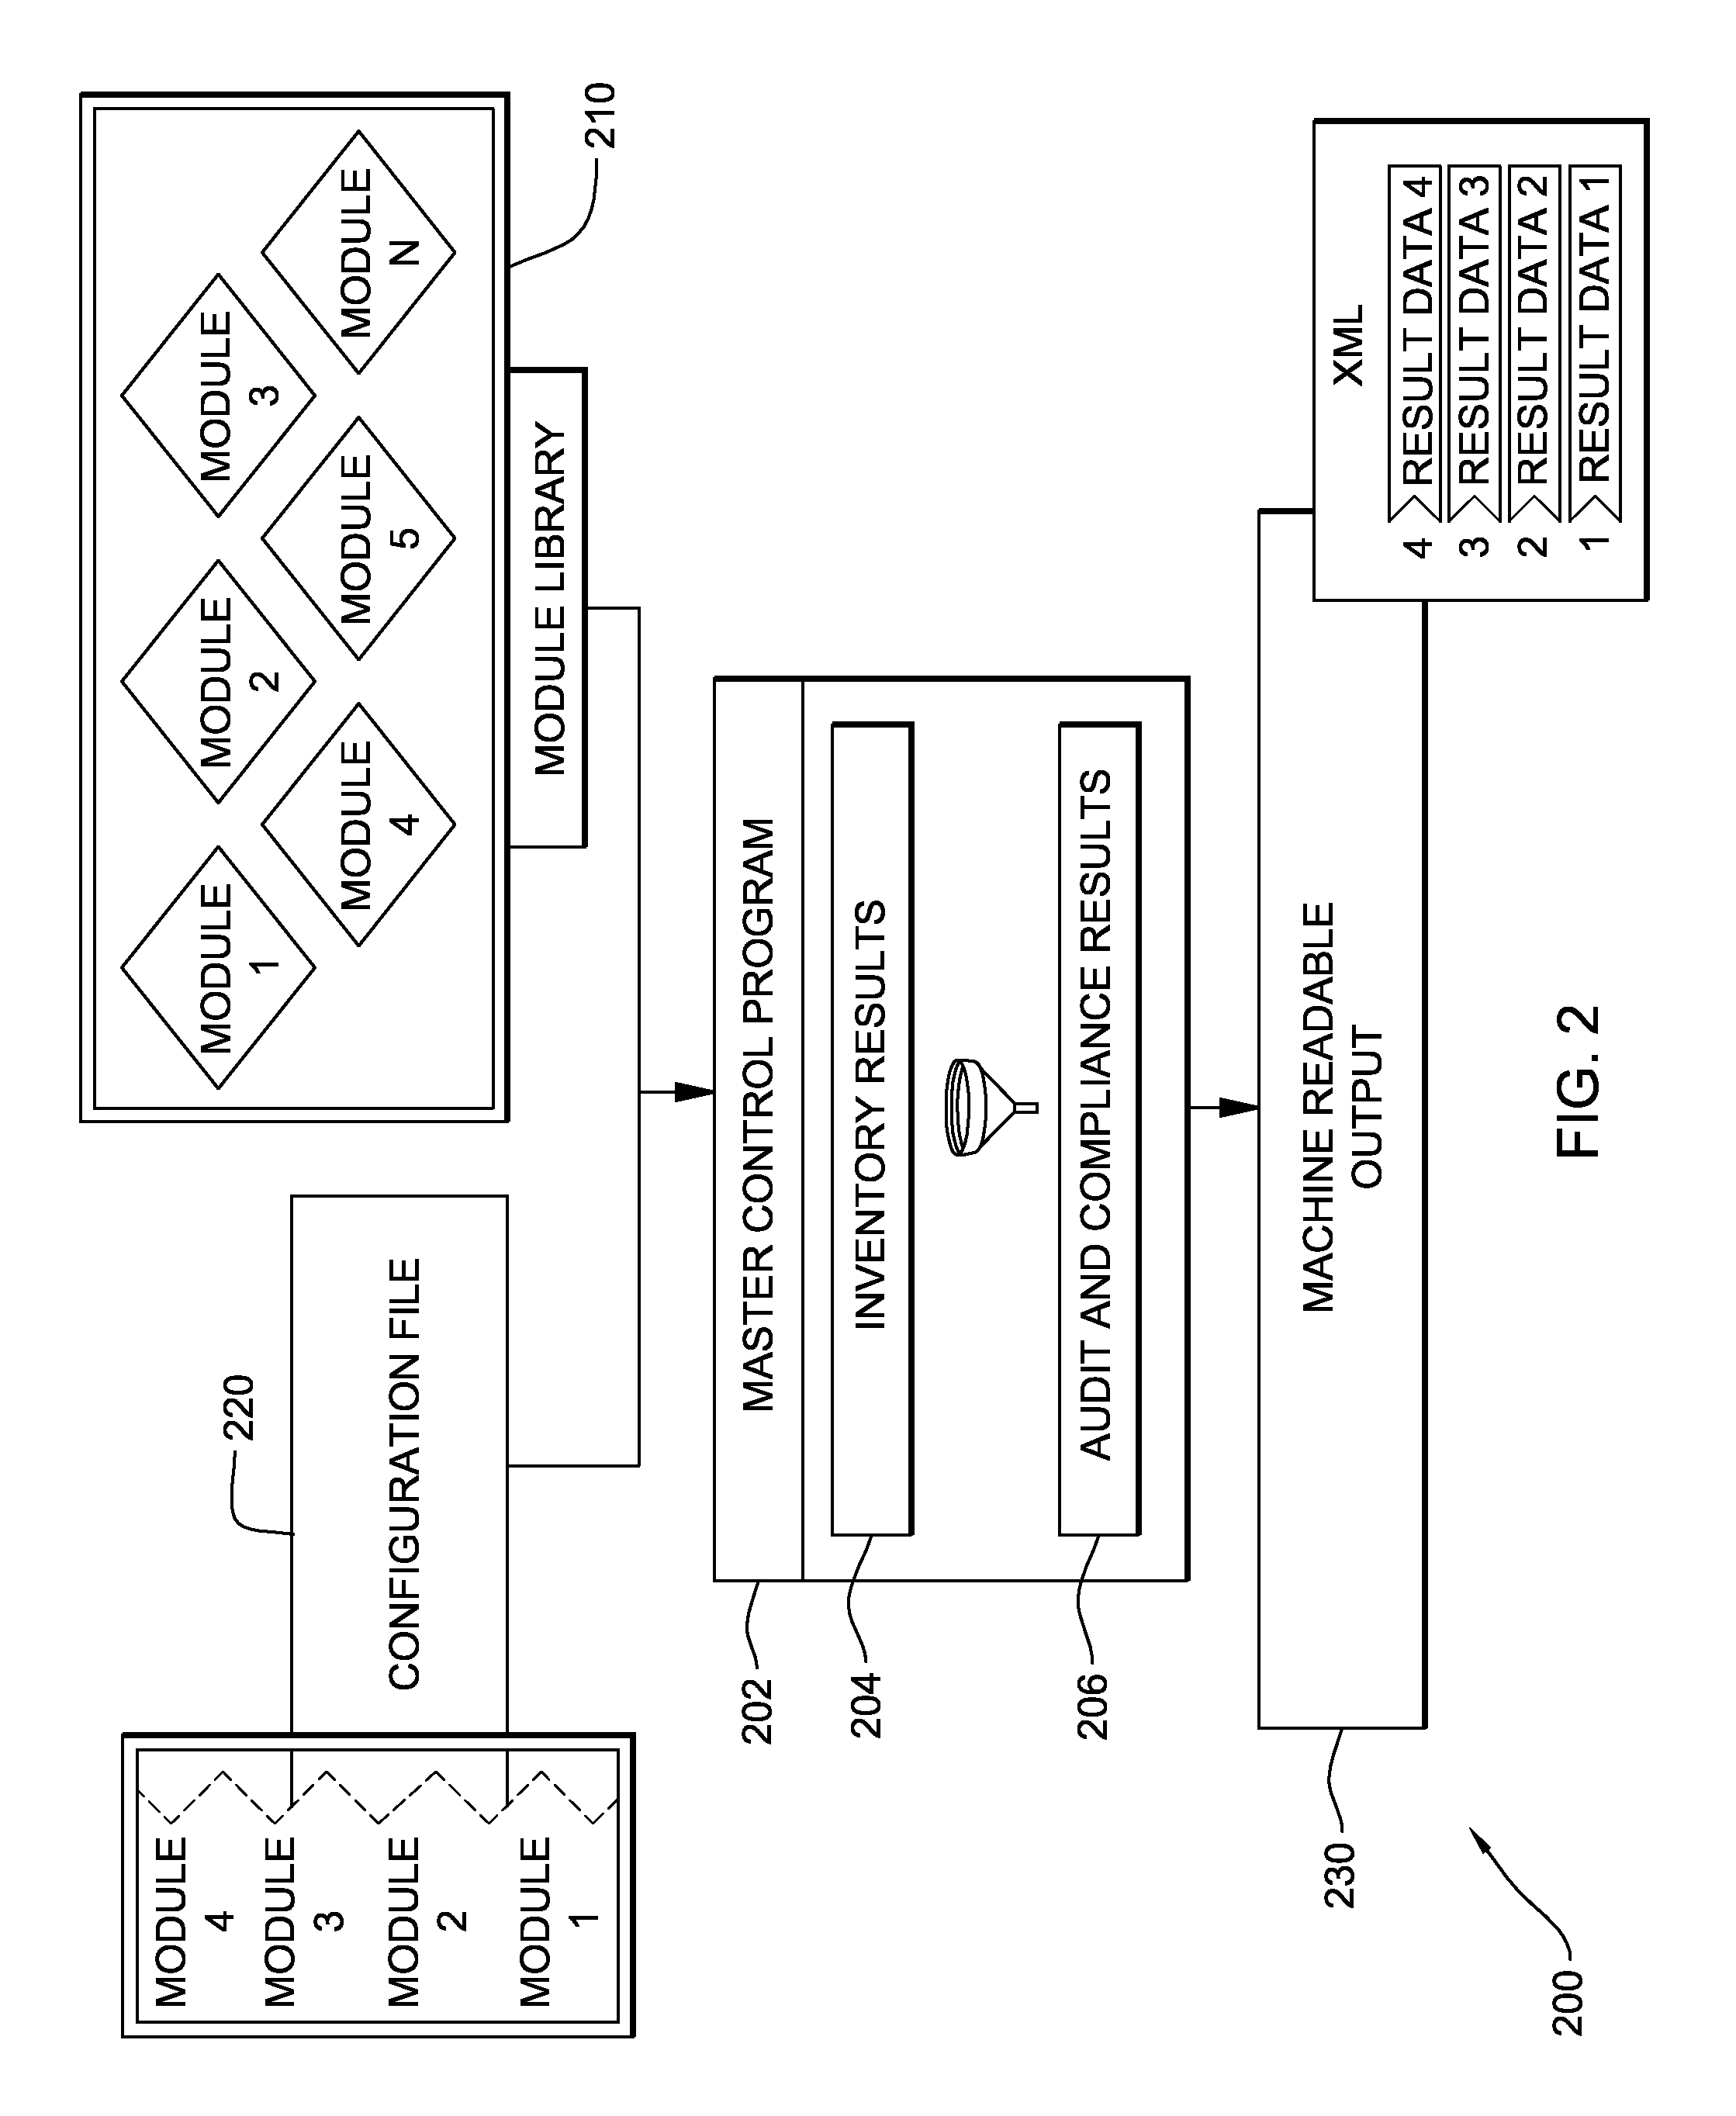 System, method and program product for dynamically performing an audit and security compliance validation in an operating environment